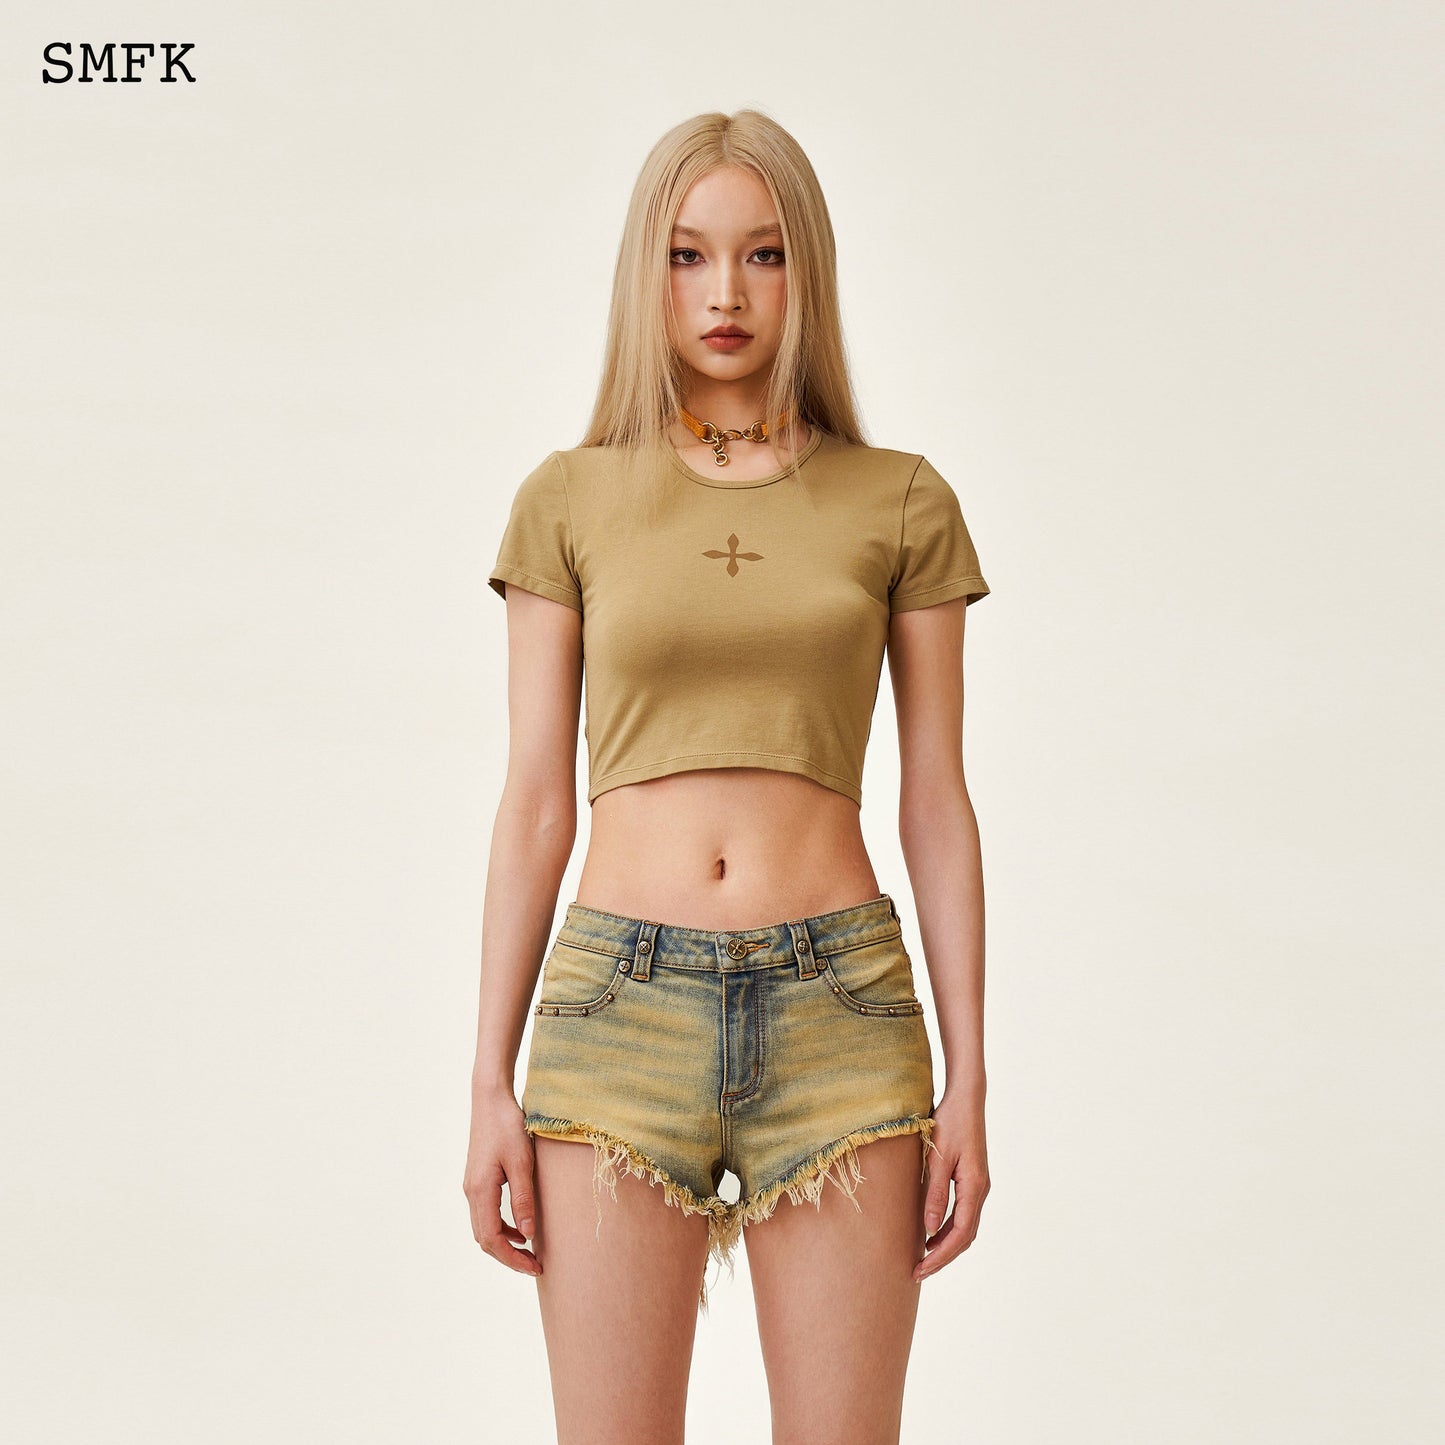 SMFK Compass Cross Classic Sporty Tights Tee In Green